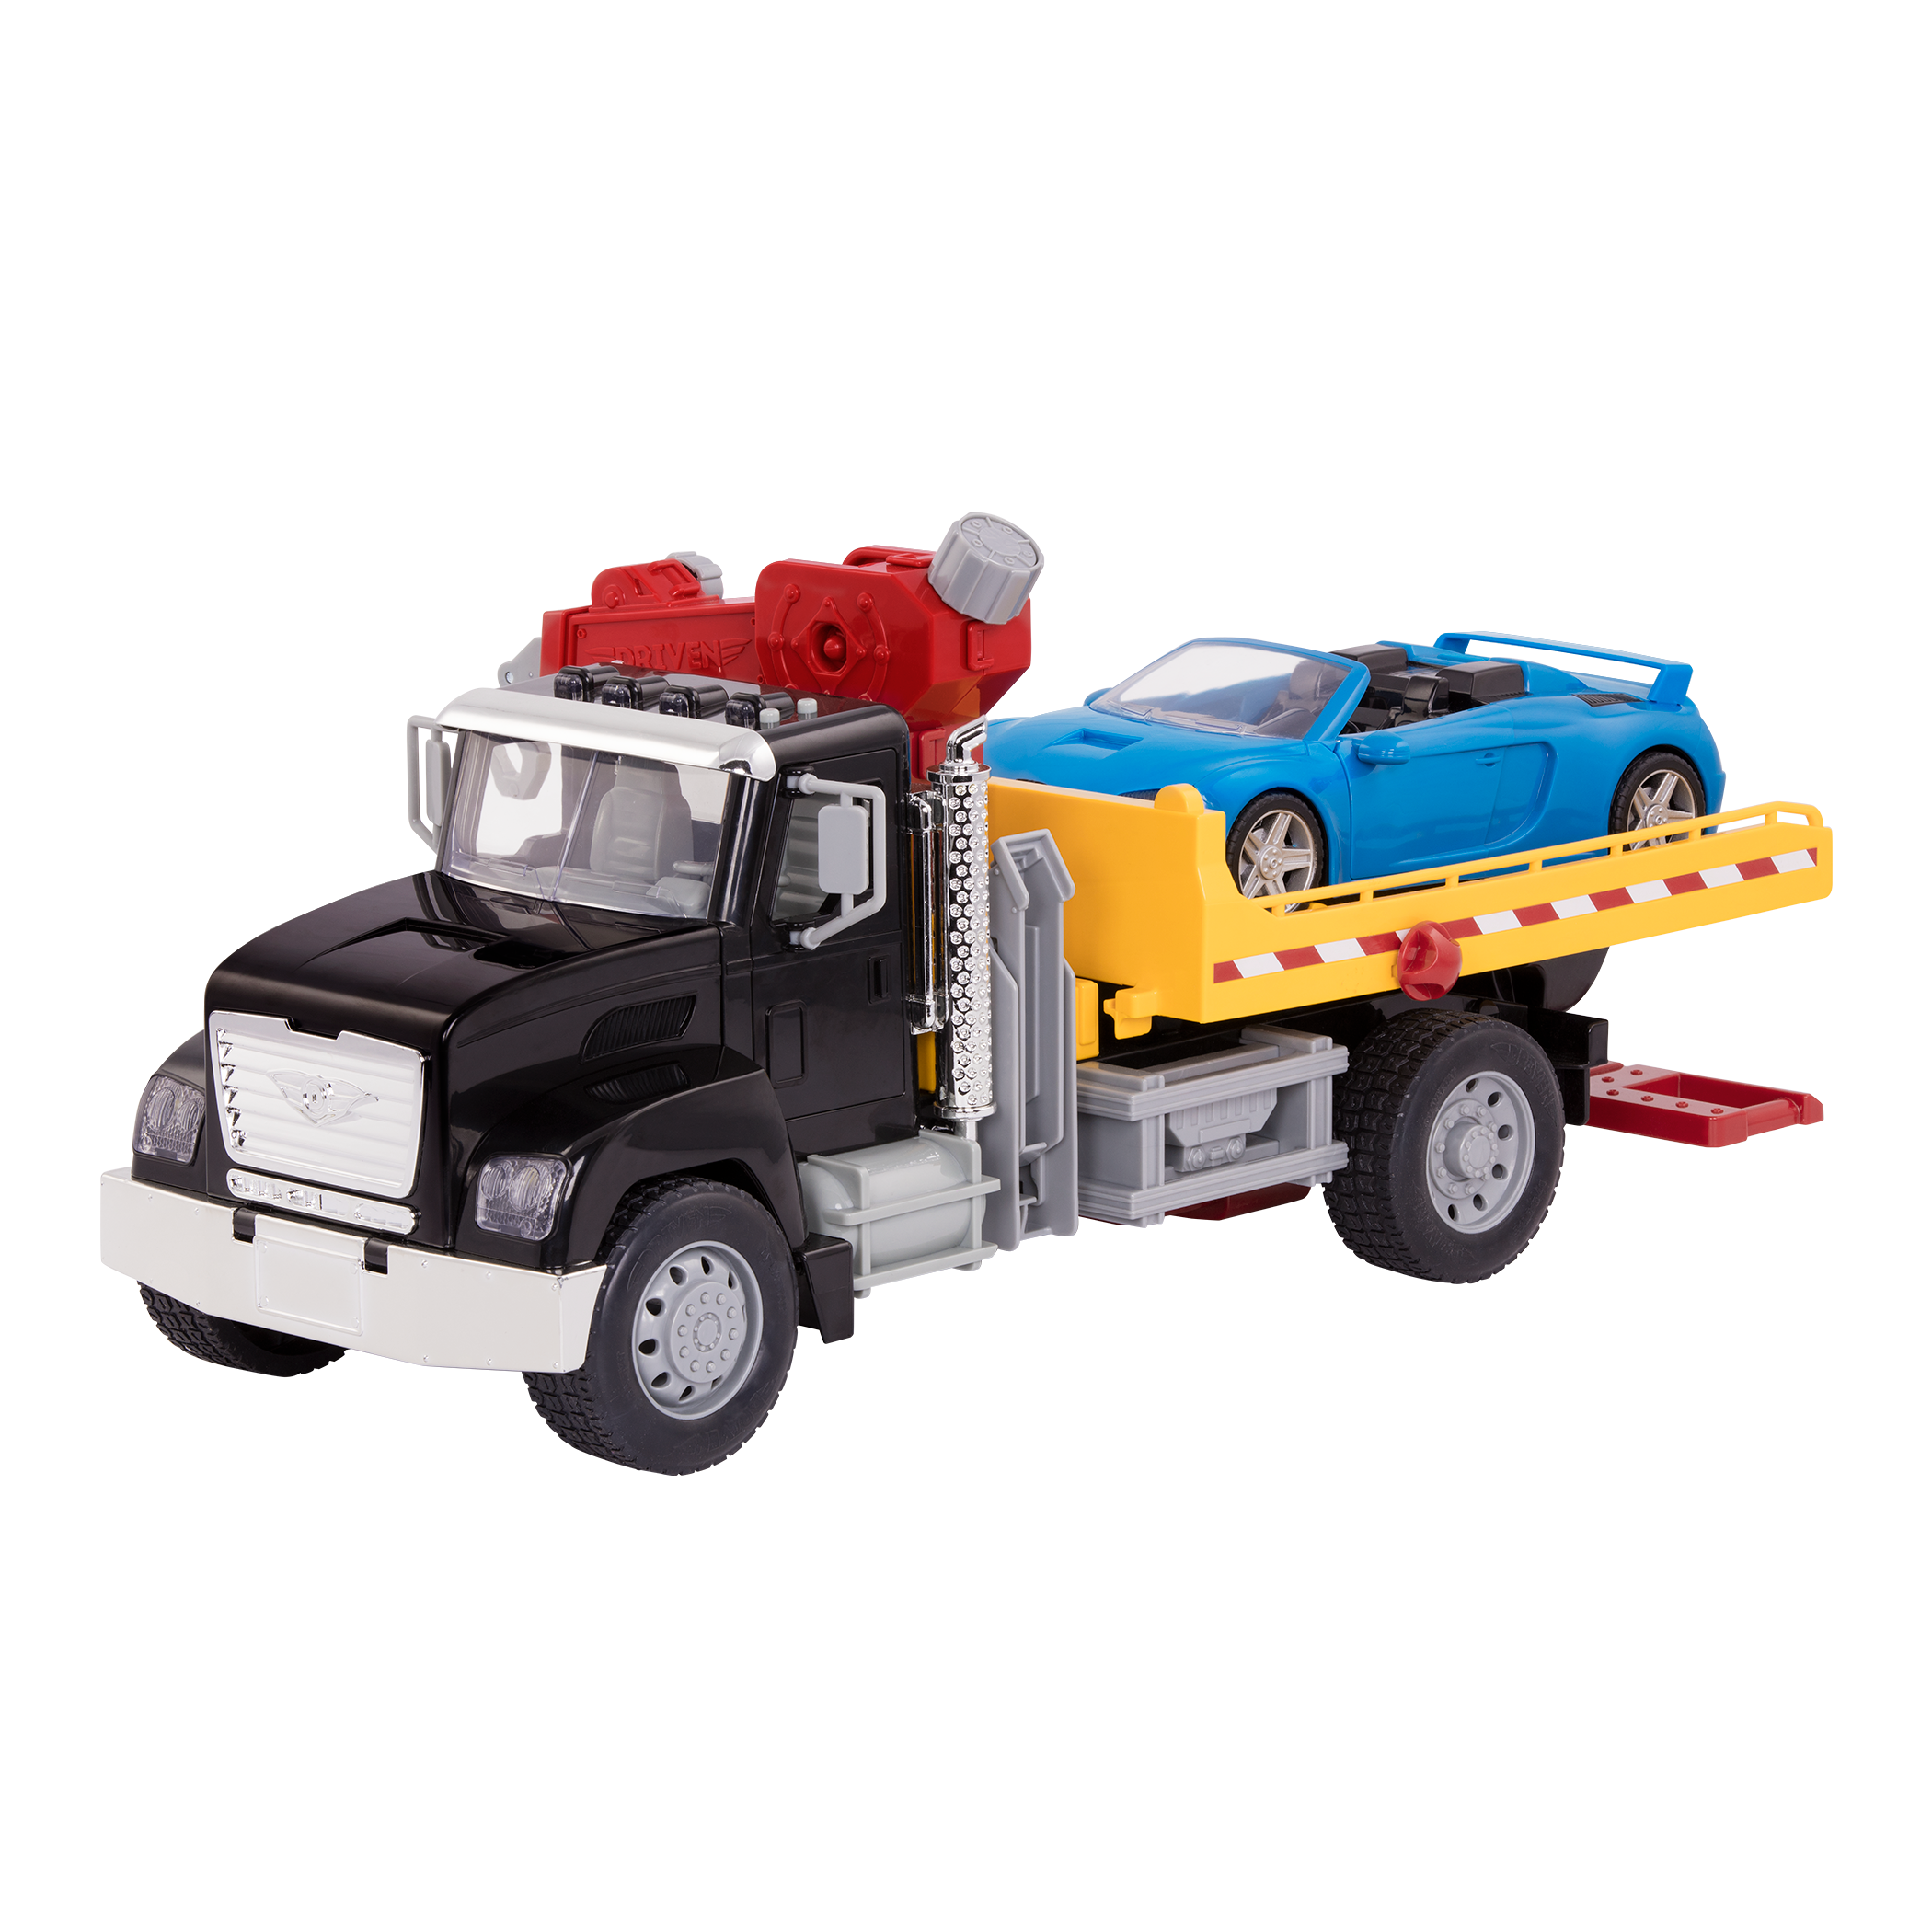 Tow Truck | Toy Trucks & Construction Toys for Kids | Nintendo-Switch-Spiele